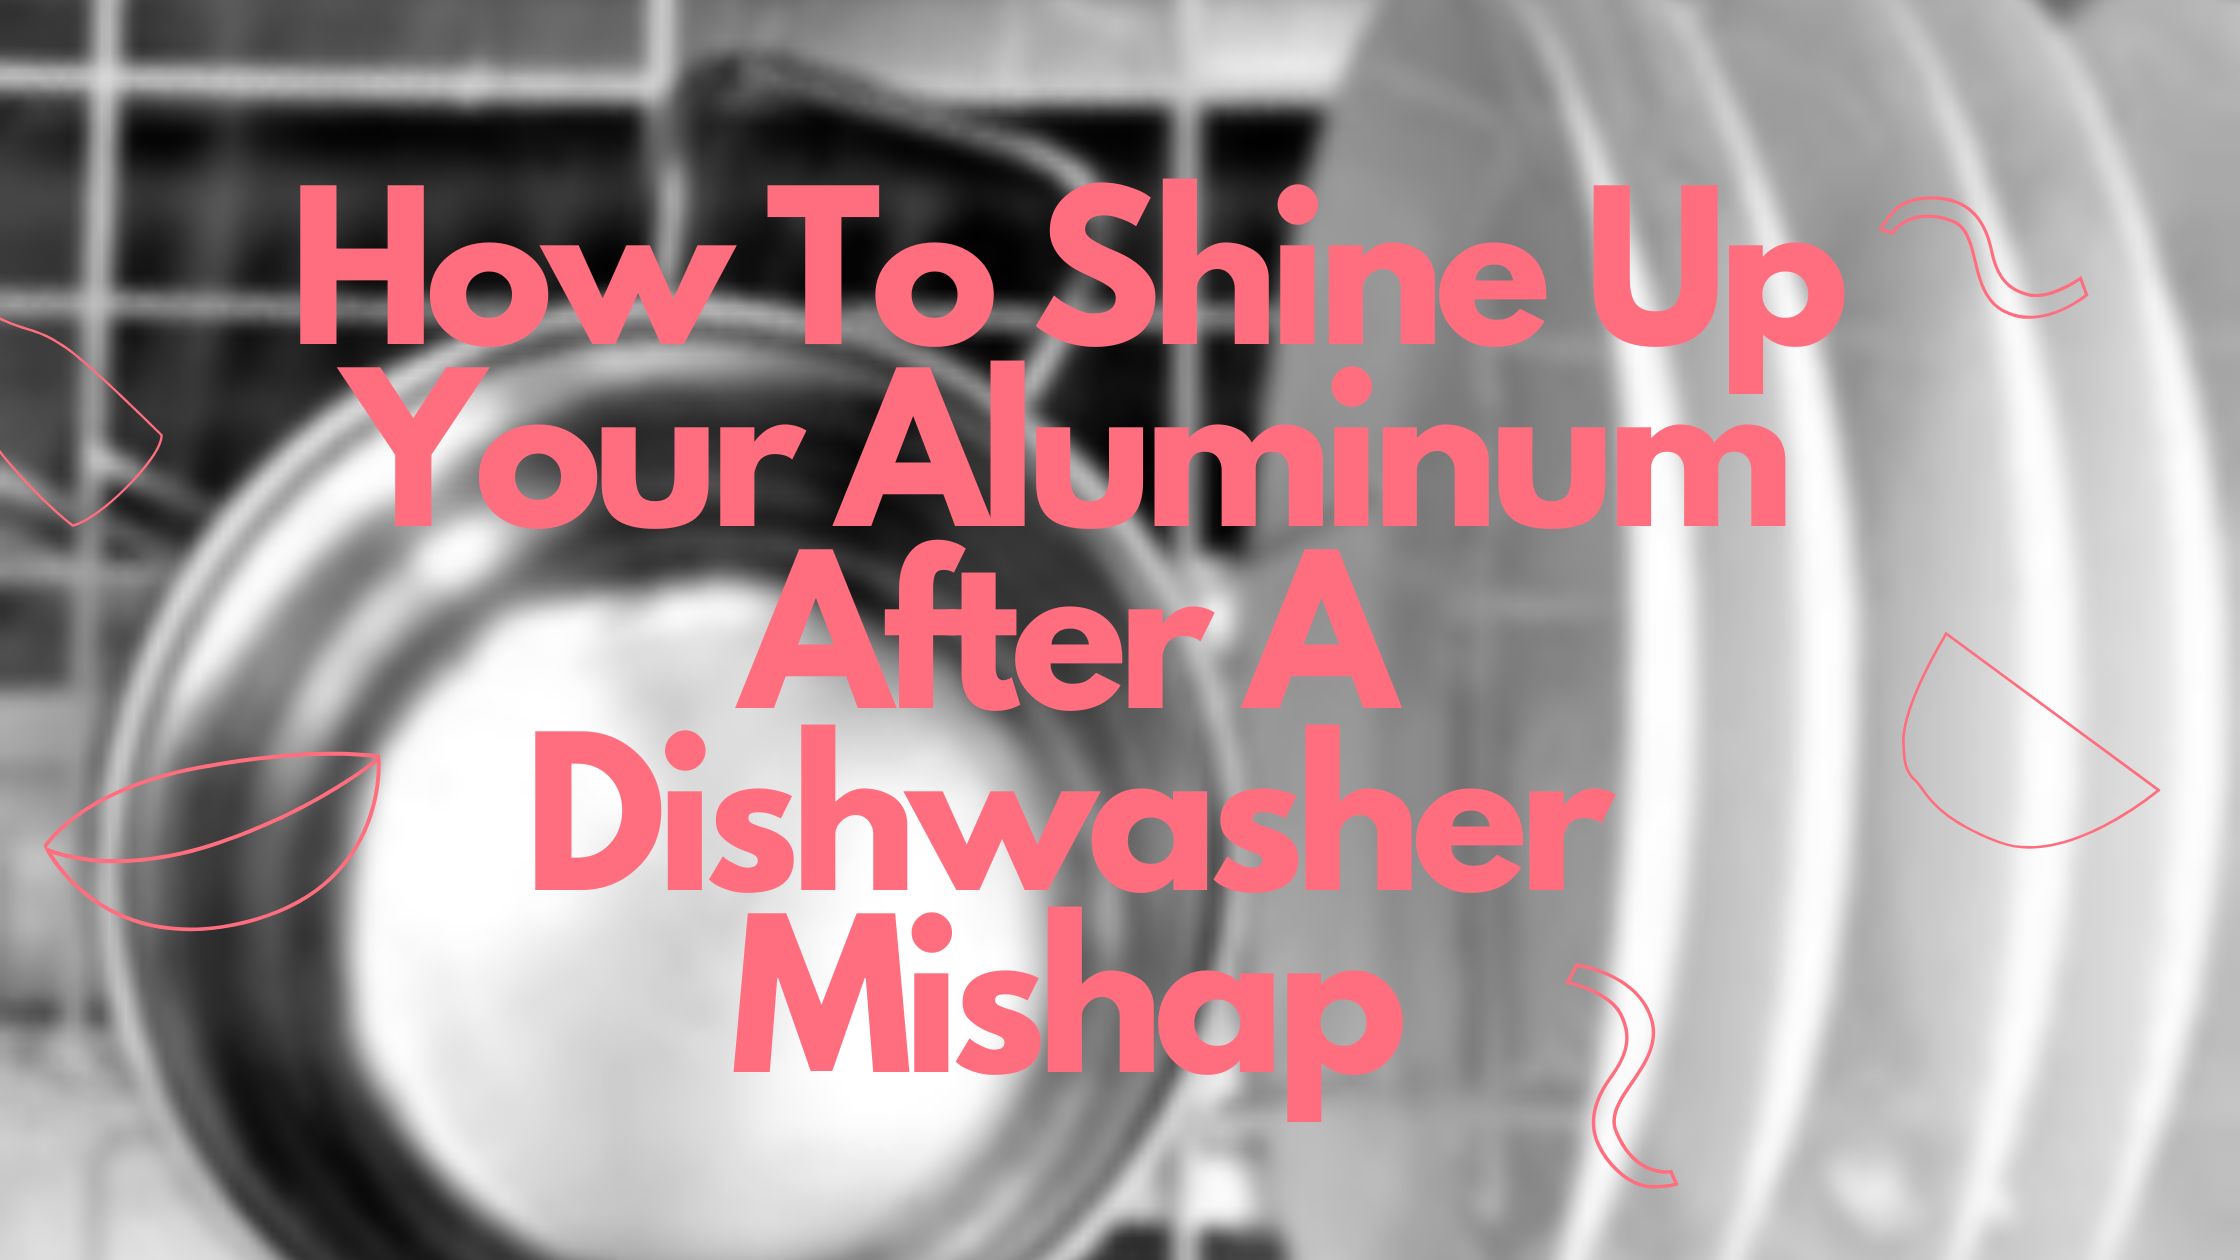 How To Clean Aluminum That Was Put In Dishwasher